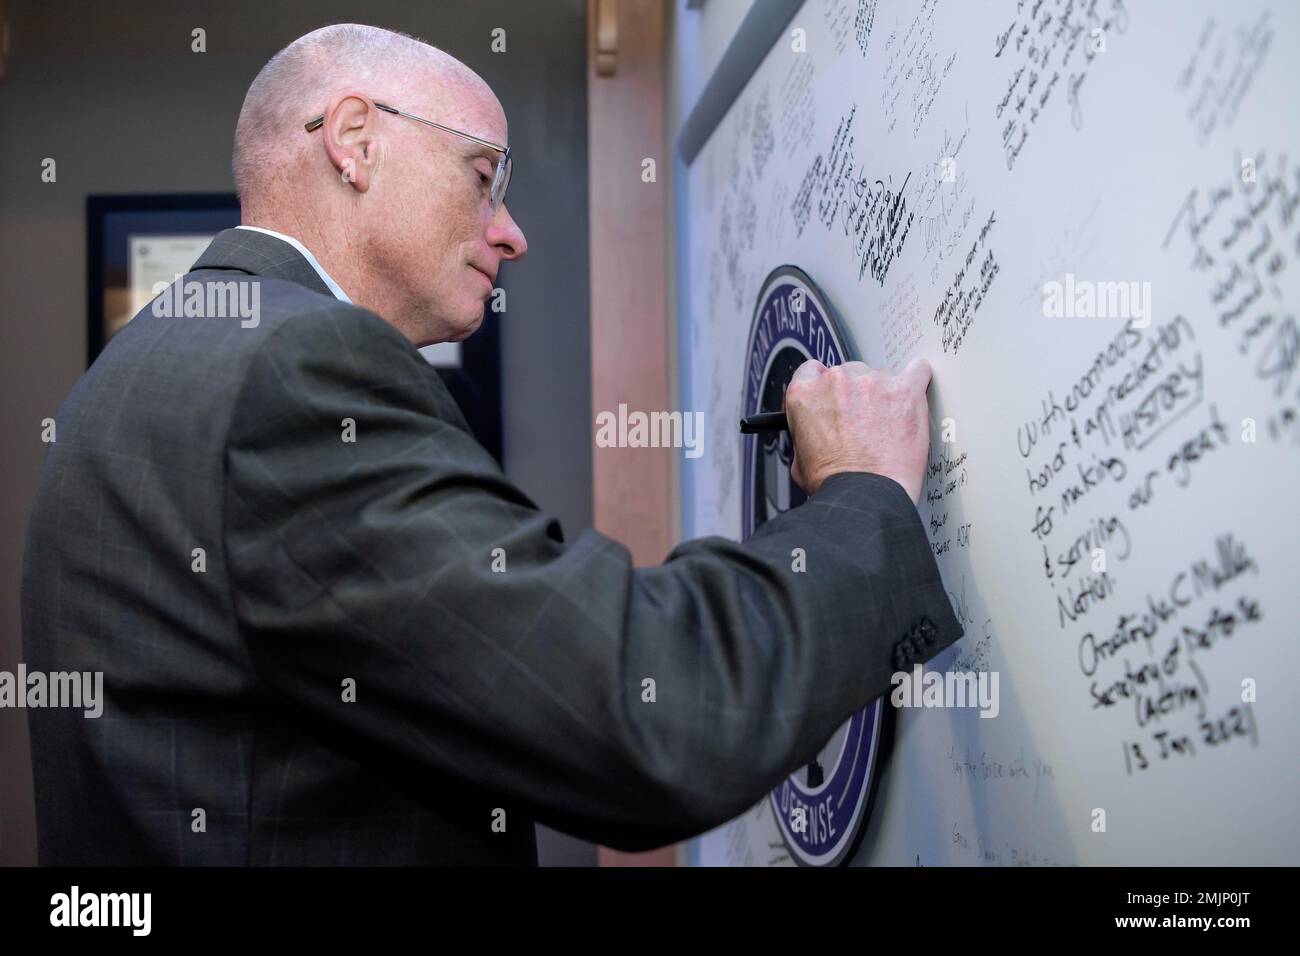 George C. Barnes, deputy director and senior civilian leader of the National Security Agency, signs the Joint Task Force-Space Defense’s board during his visit to the organization at Schriever Space Force Base, Colorado, Aug. 31, 2022. This marked Barnes' first visit to the JTF-SD and its National Space Defense Center. The JTF-SD, and its NSDC, provide unprecedented unity of effort with the Department of Defense, Intelligence Community and National Reconnaissance Office to protect and defend against threats in the space domain. Stock Photo